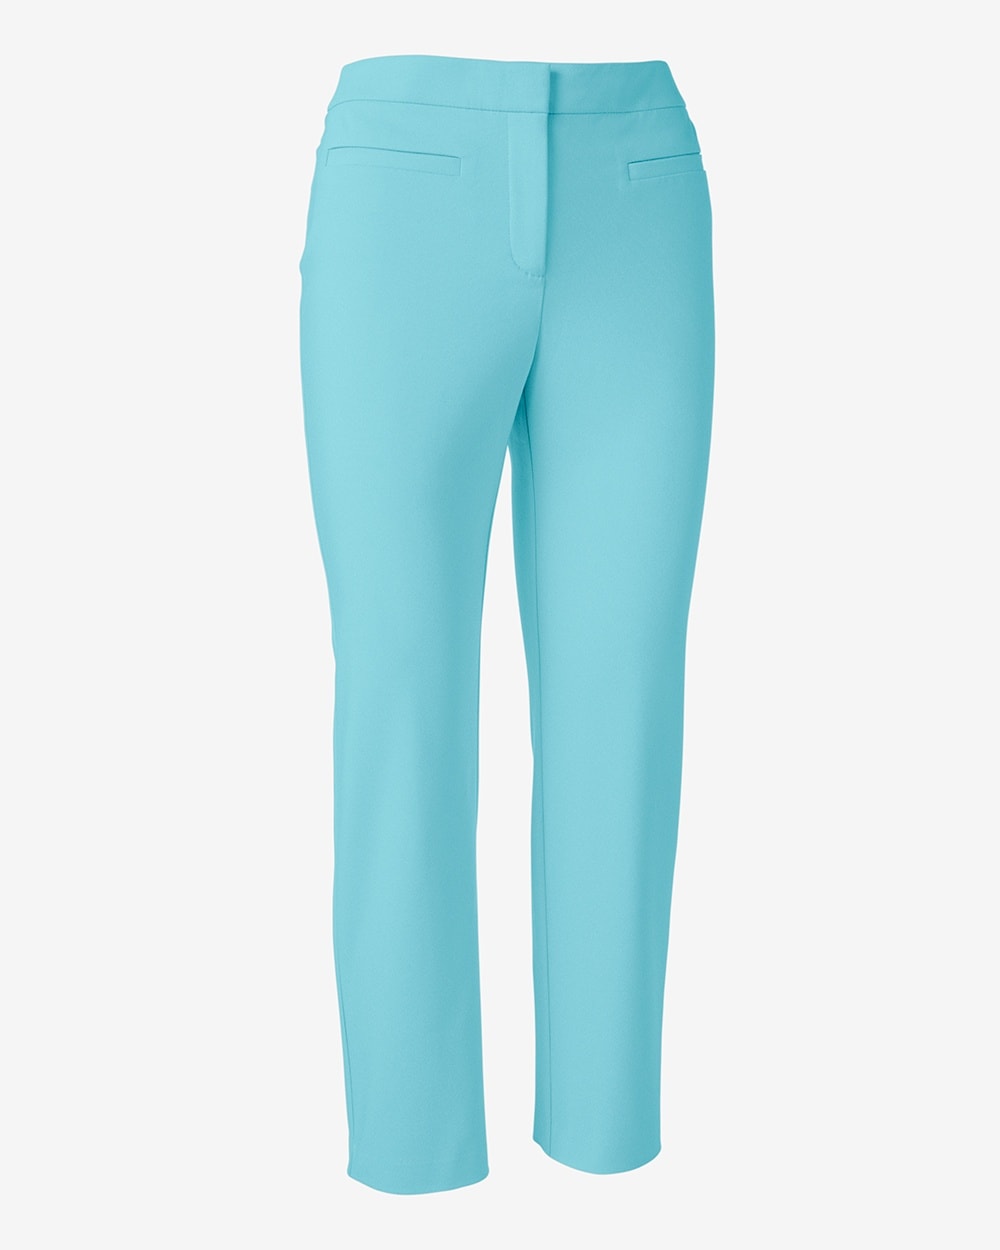 Fabulously Slimming Darcy Ankle Pants